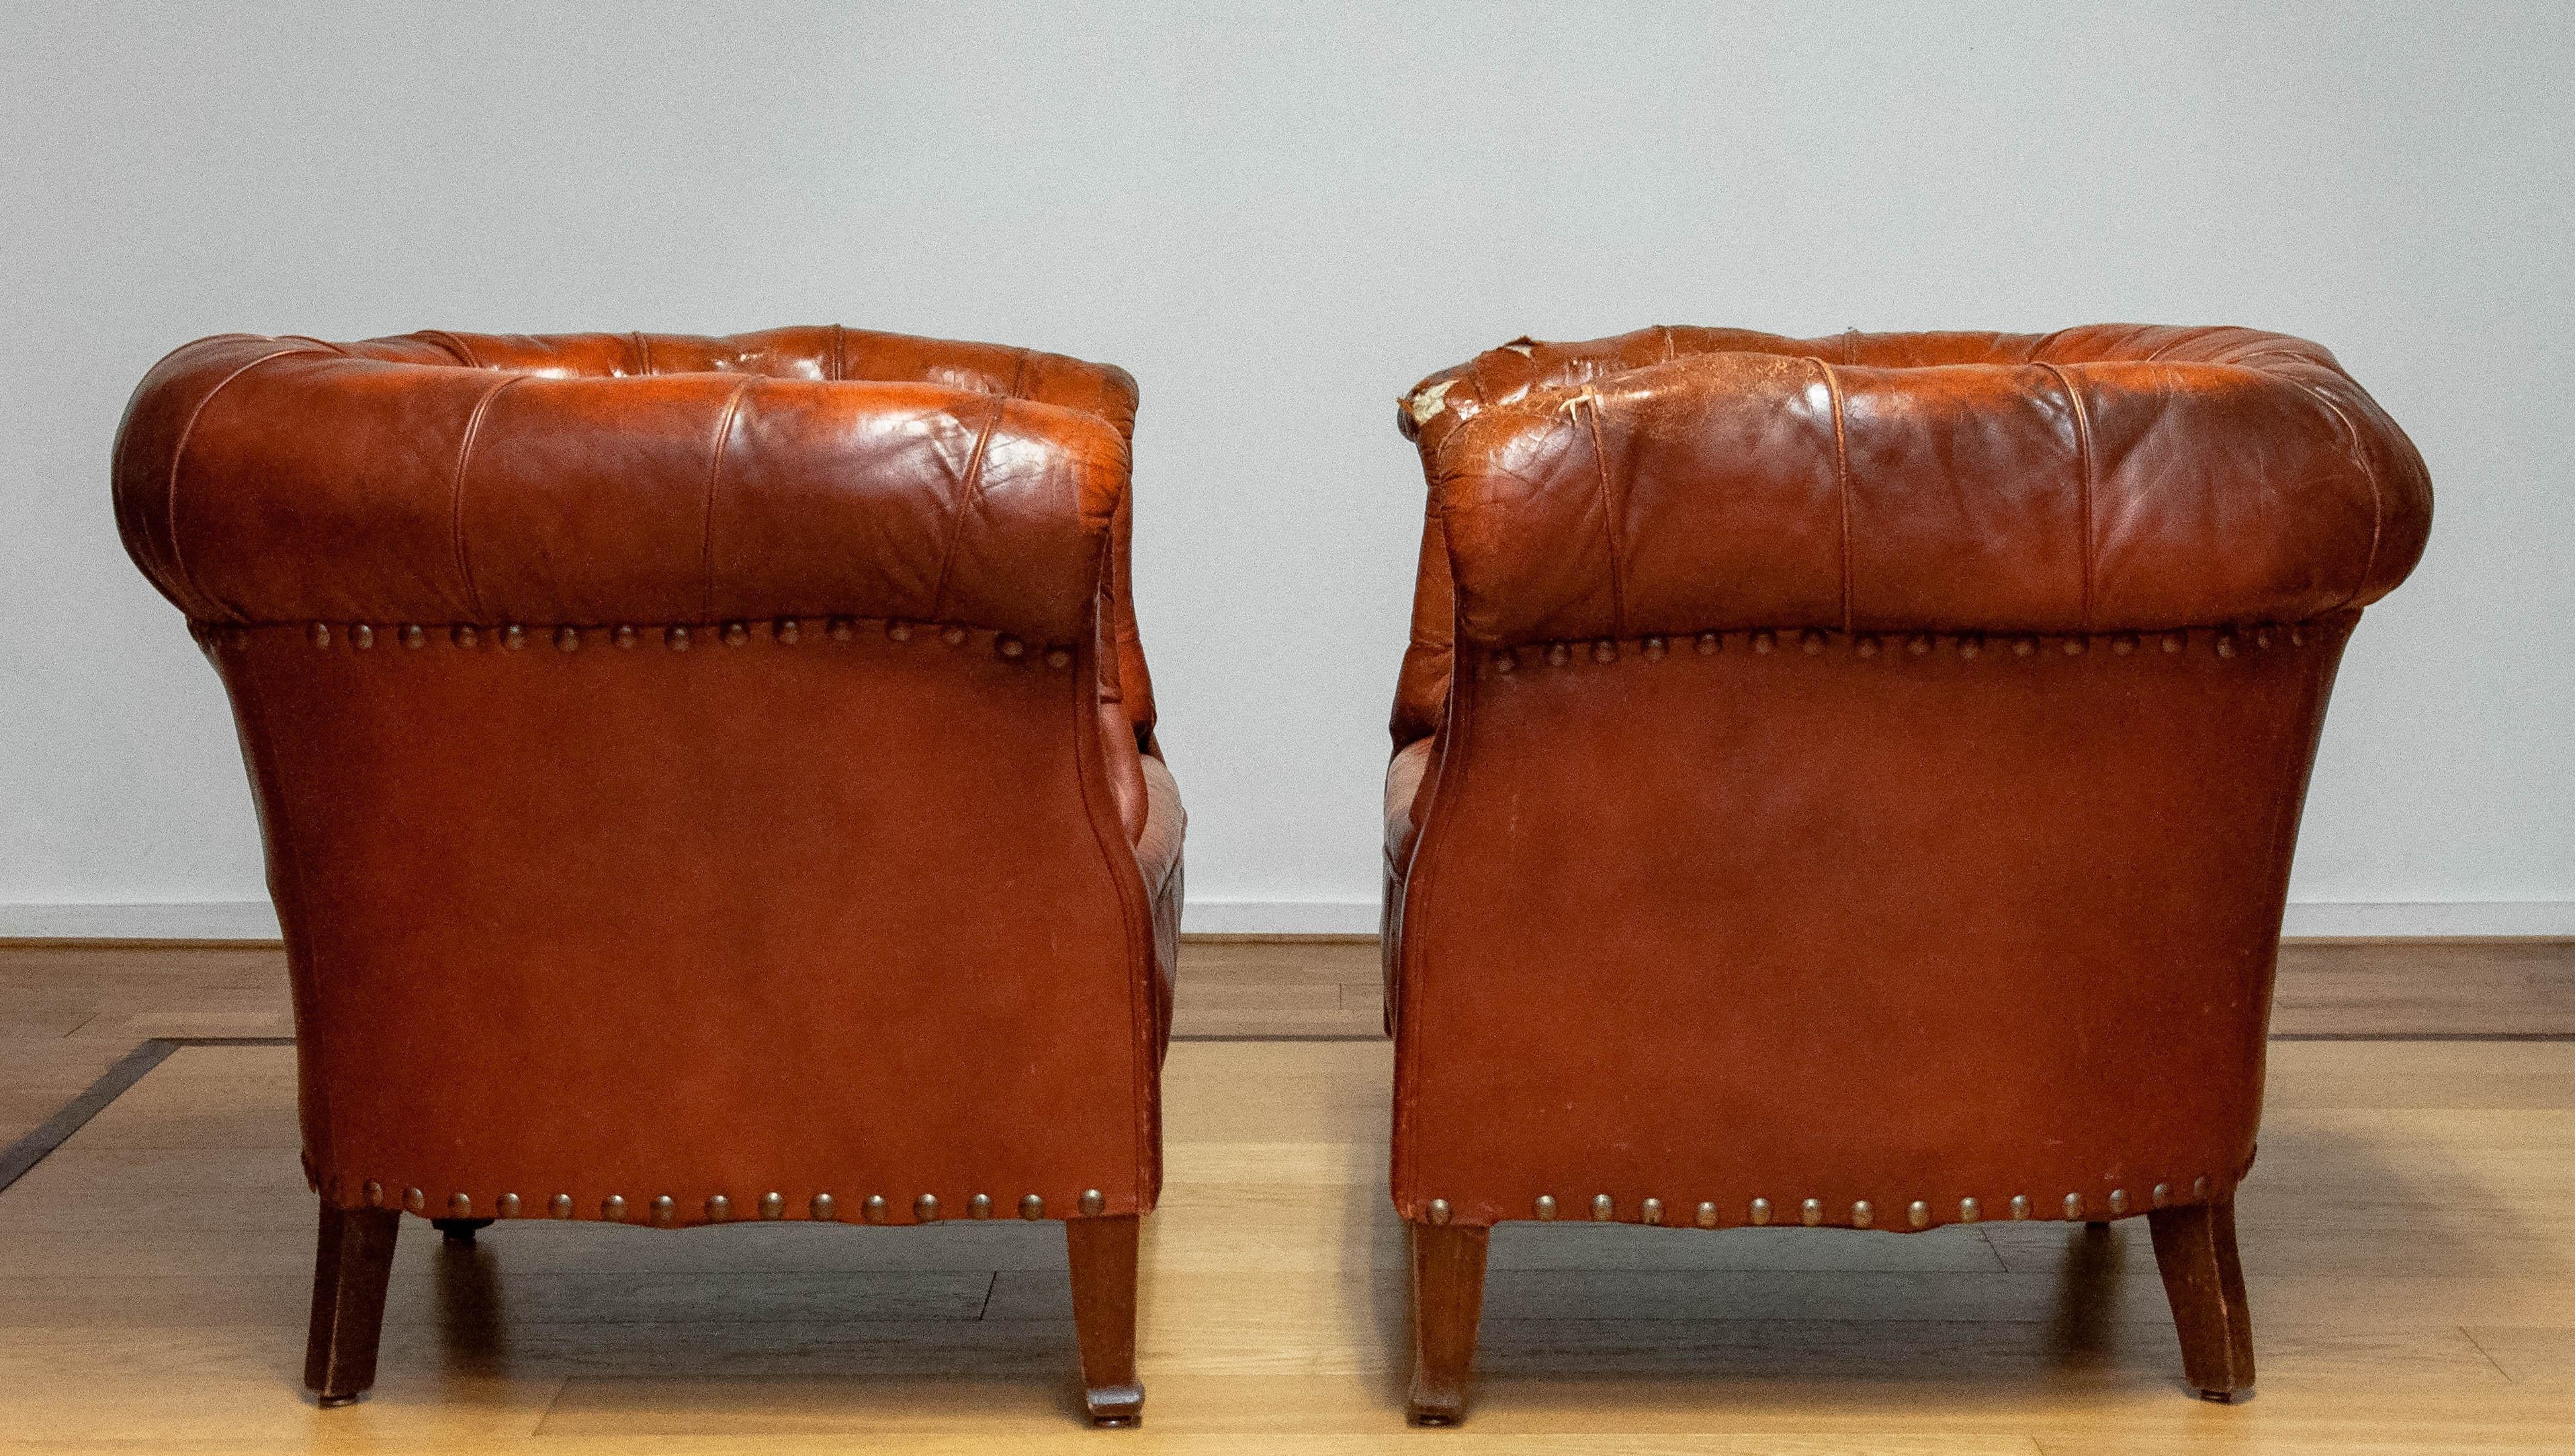 Mid-20th Century Pair 1940s Swedish Tufted Club Chair 'Chesterfield Model' Tan Brown Worn Leather